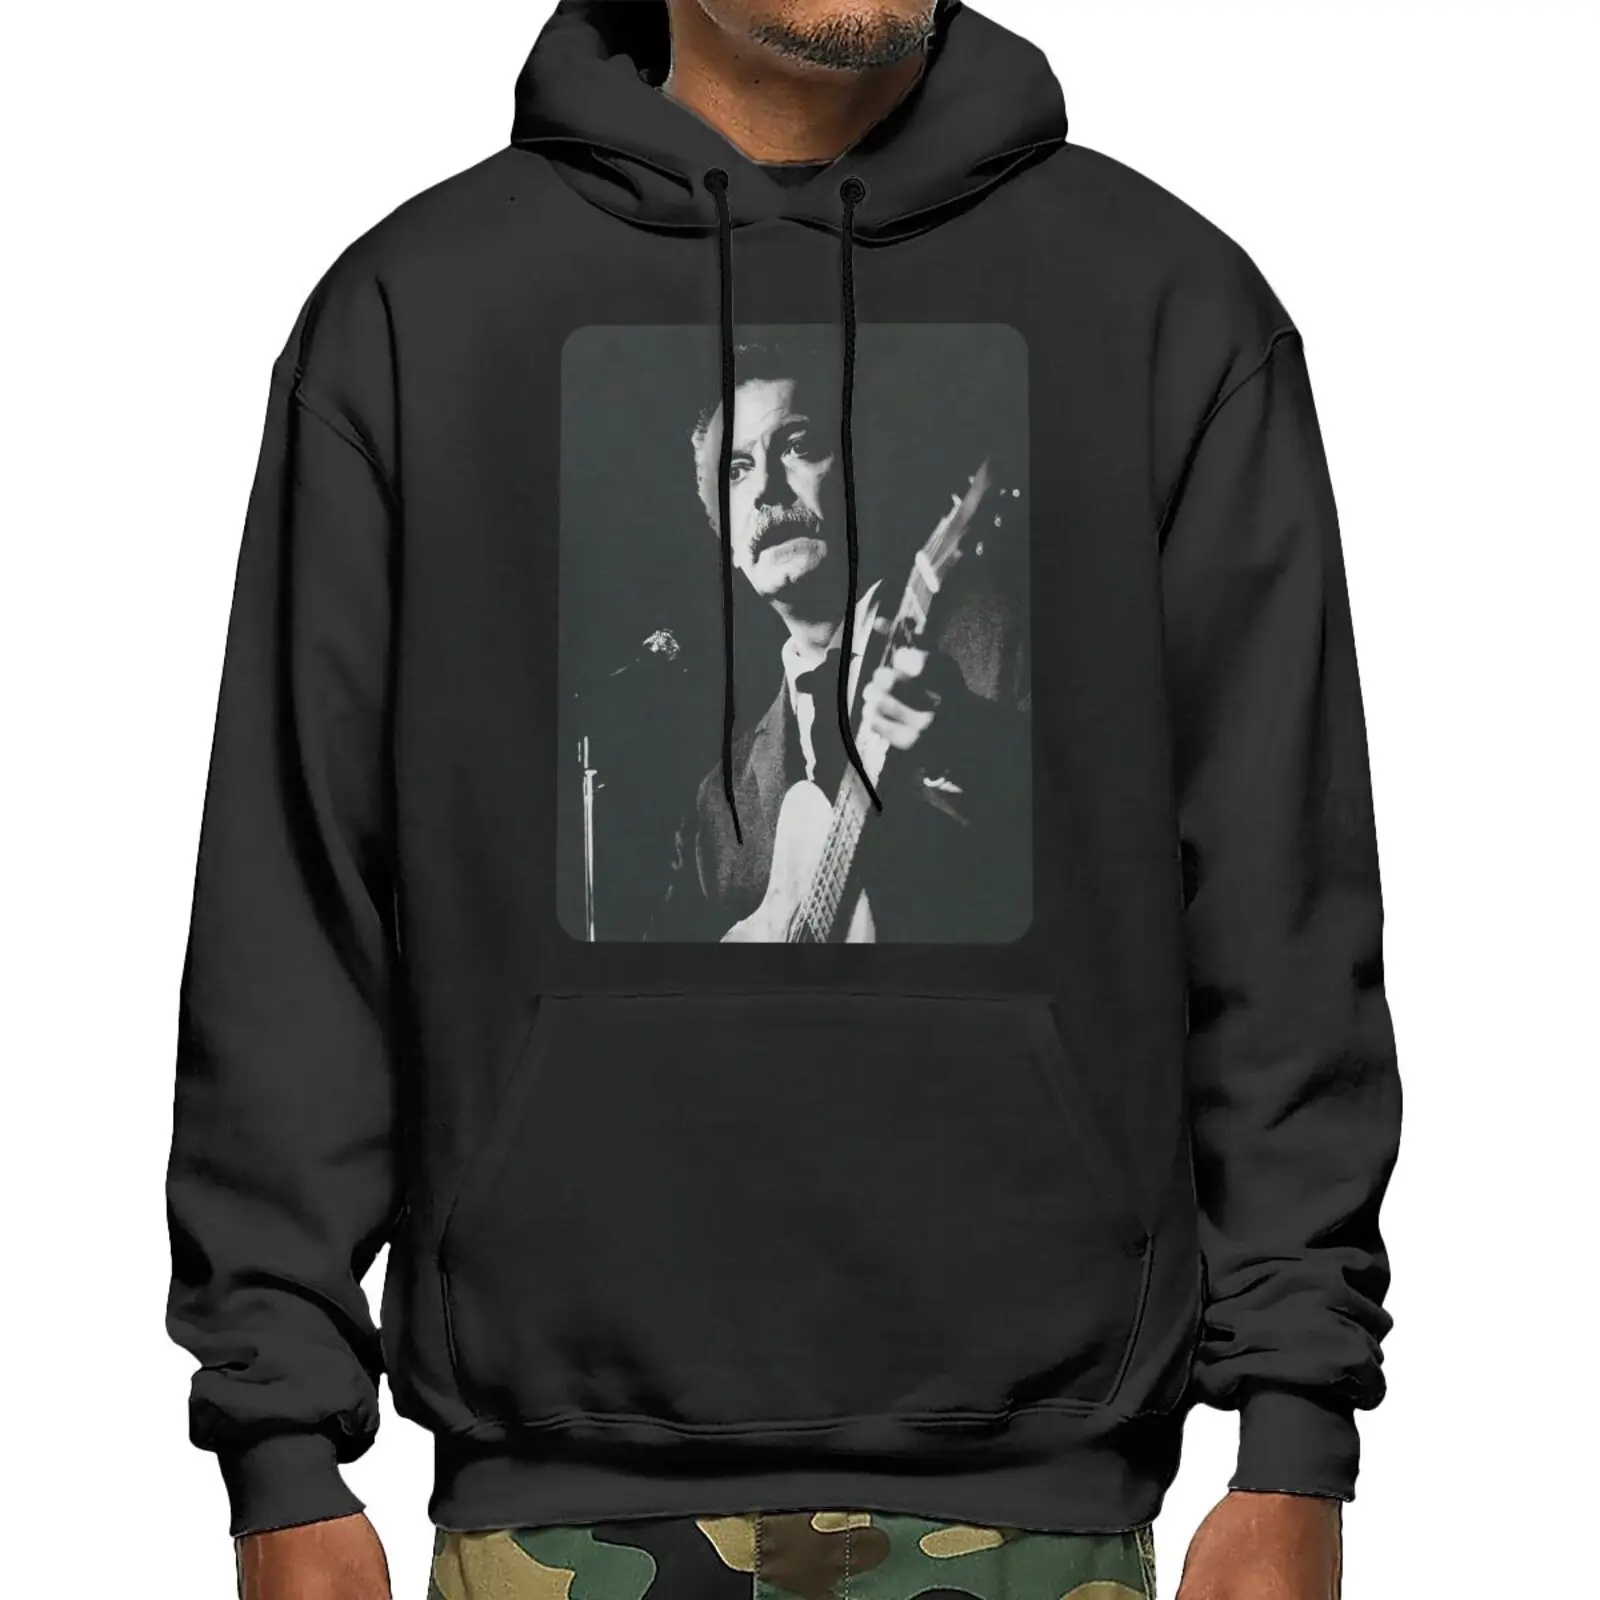 

Georges Brassens Chanteur Francais To Sweatshirts Hoodies Anime Women Hooded Sweater Sweats Sweatshirts For Men Gothic Clothes